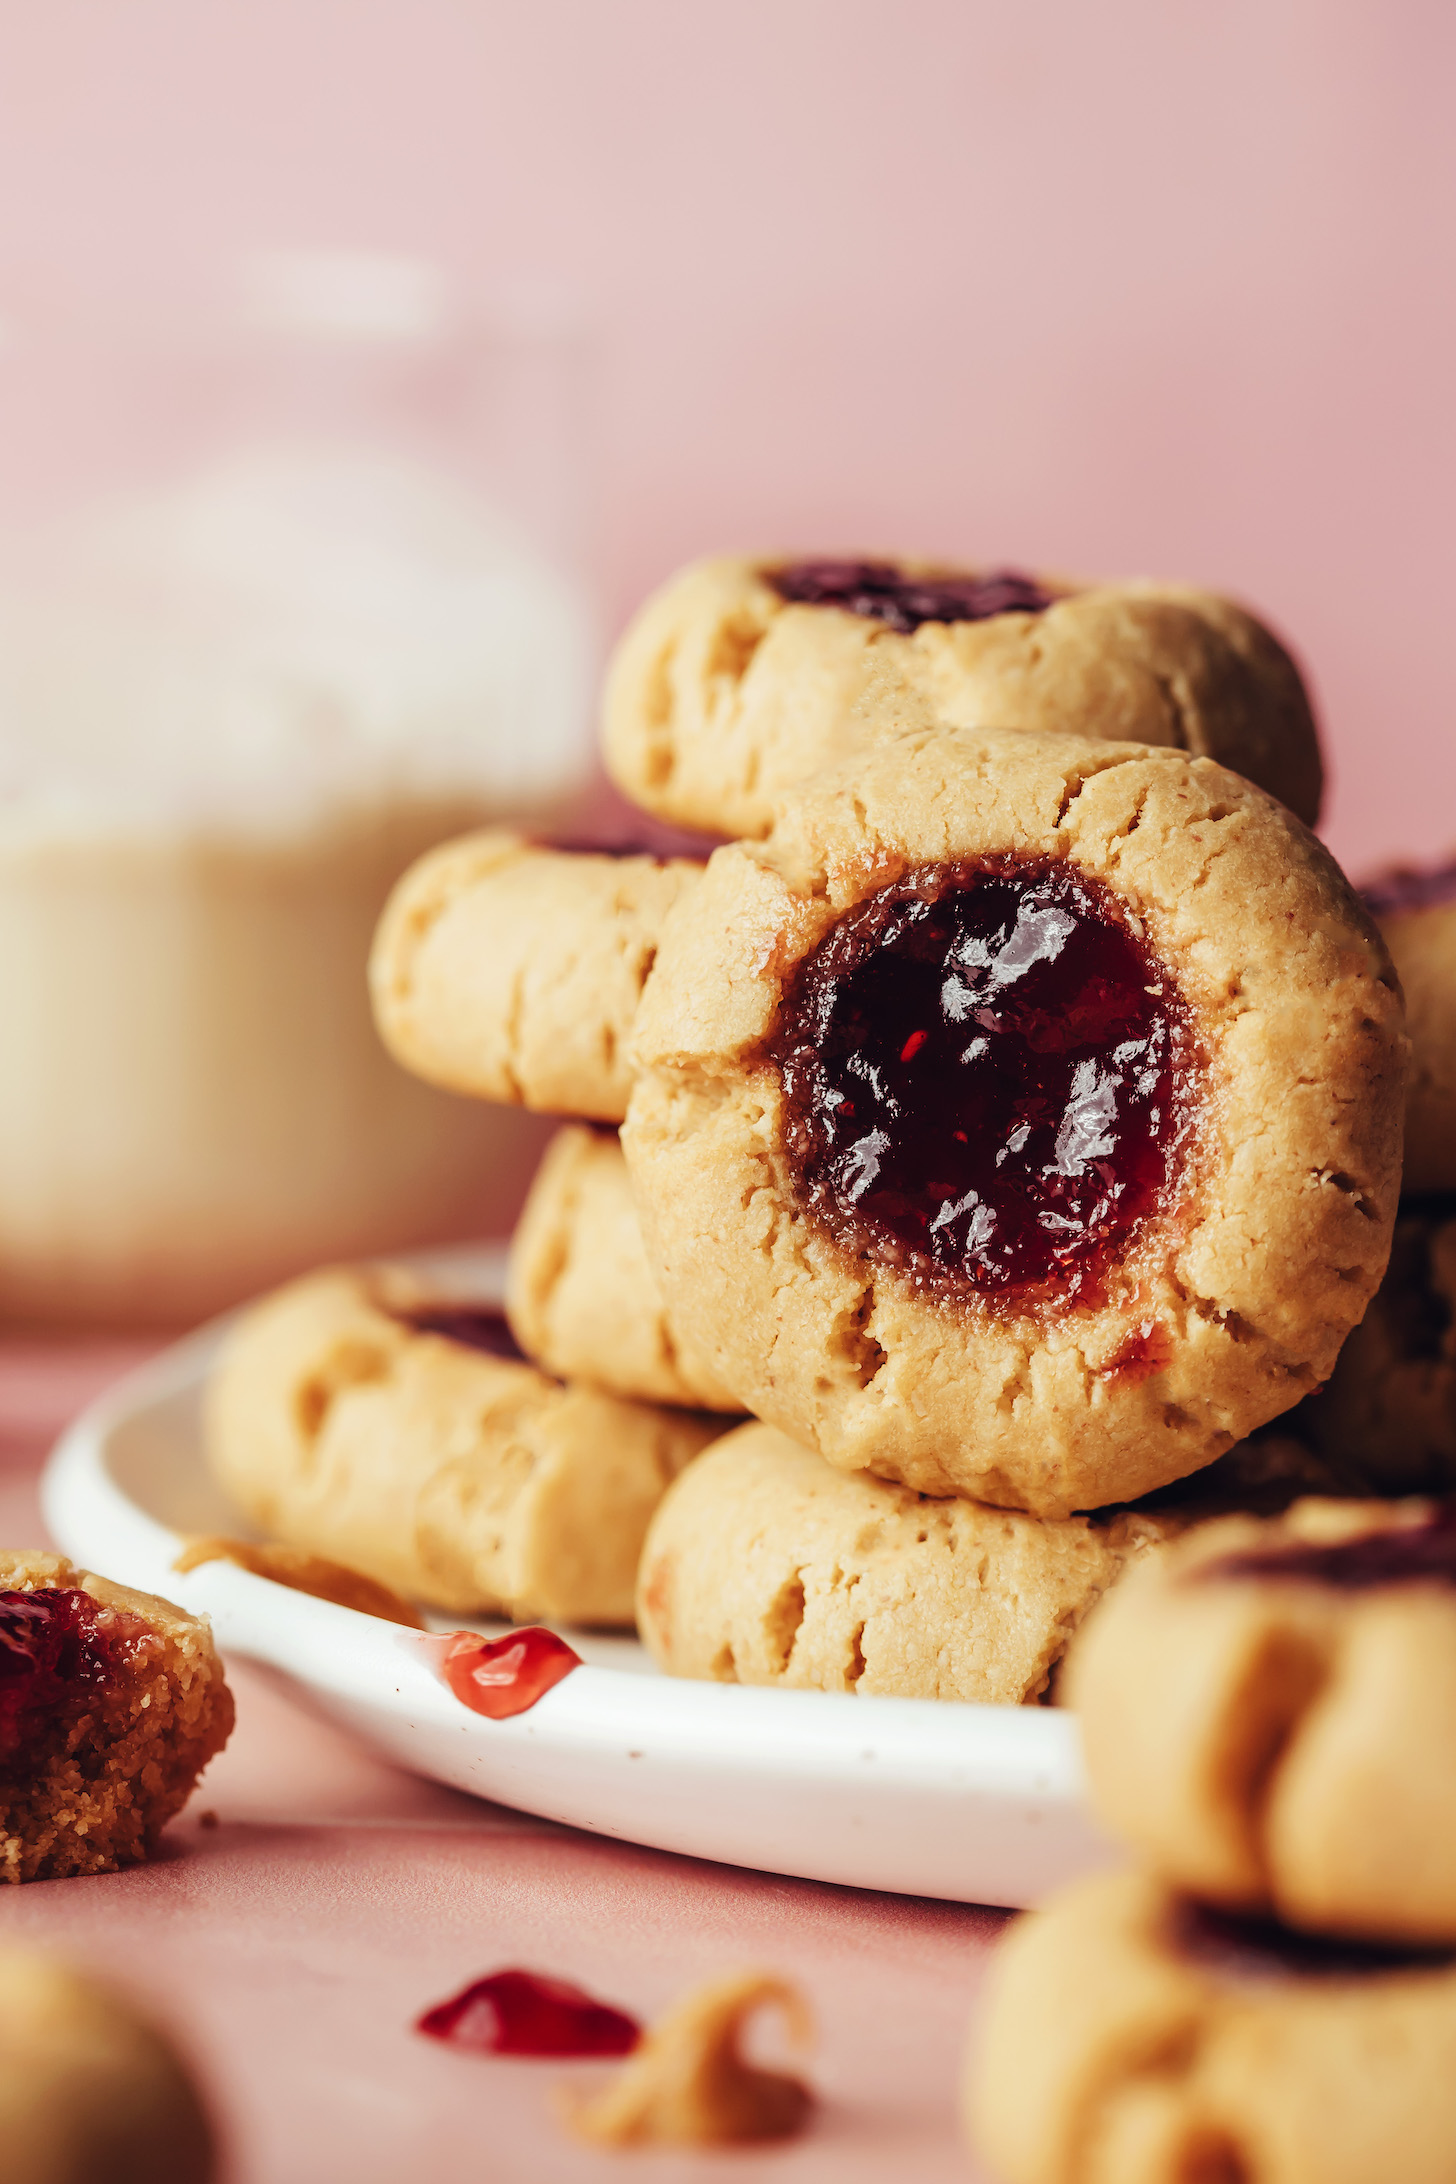 Stacks of vegan gluten-free peanut butter and jelly thumbprint cookies